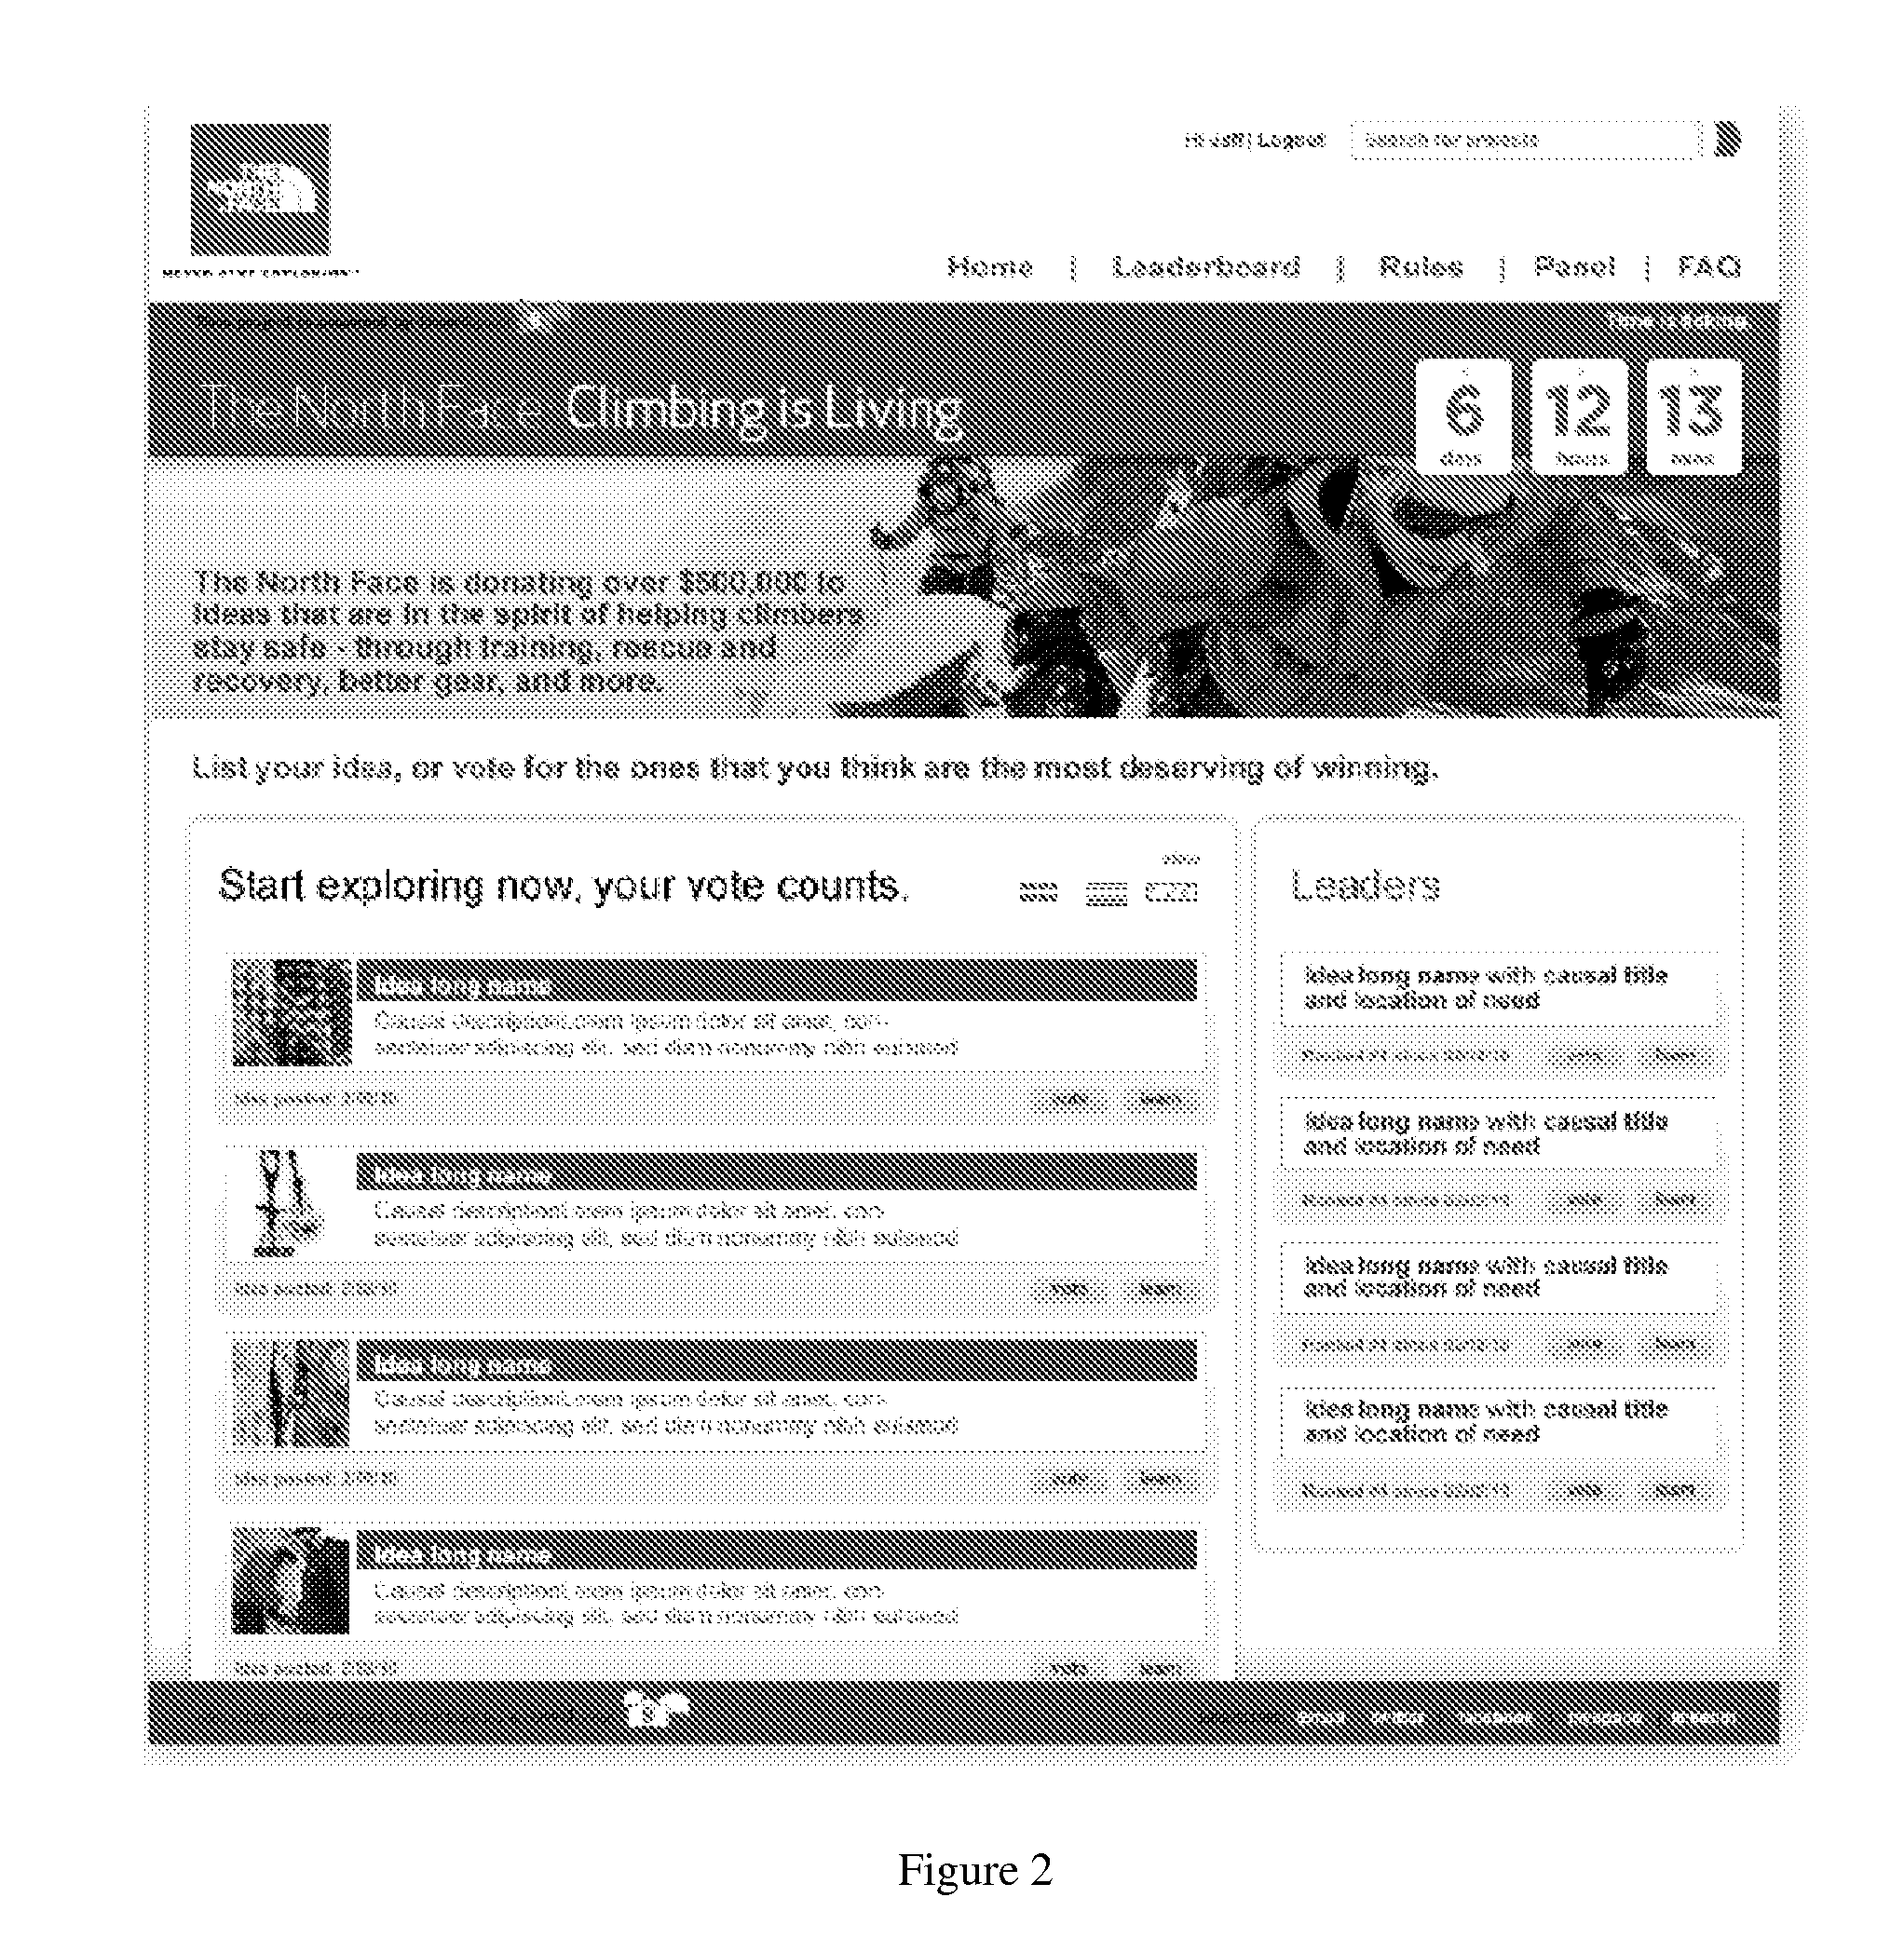 System and Method for Crowd-Based Resource and Data Management